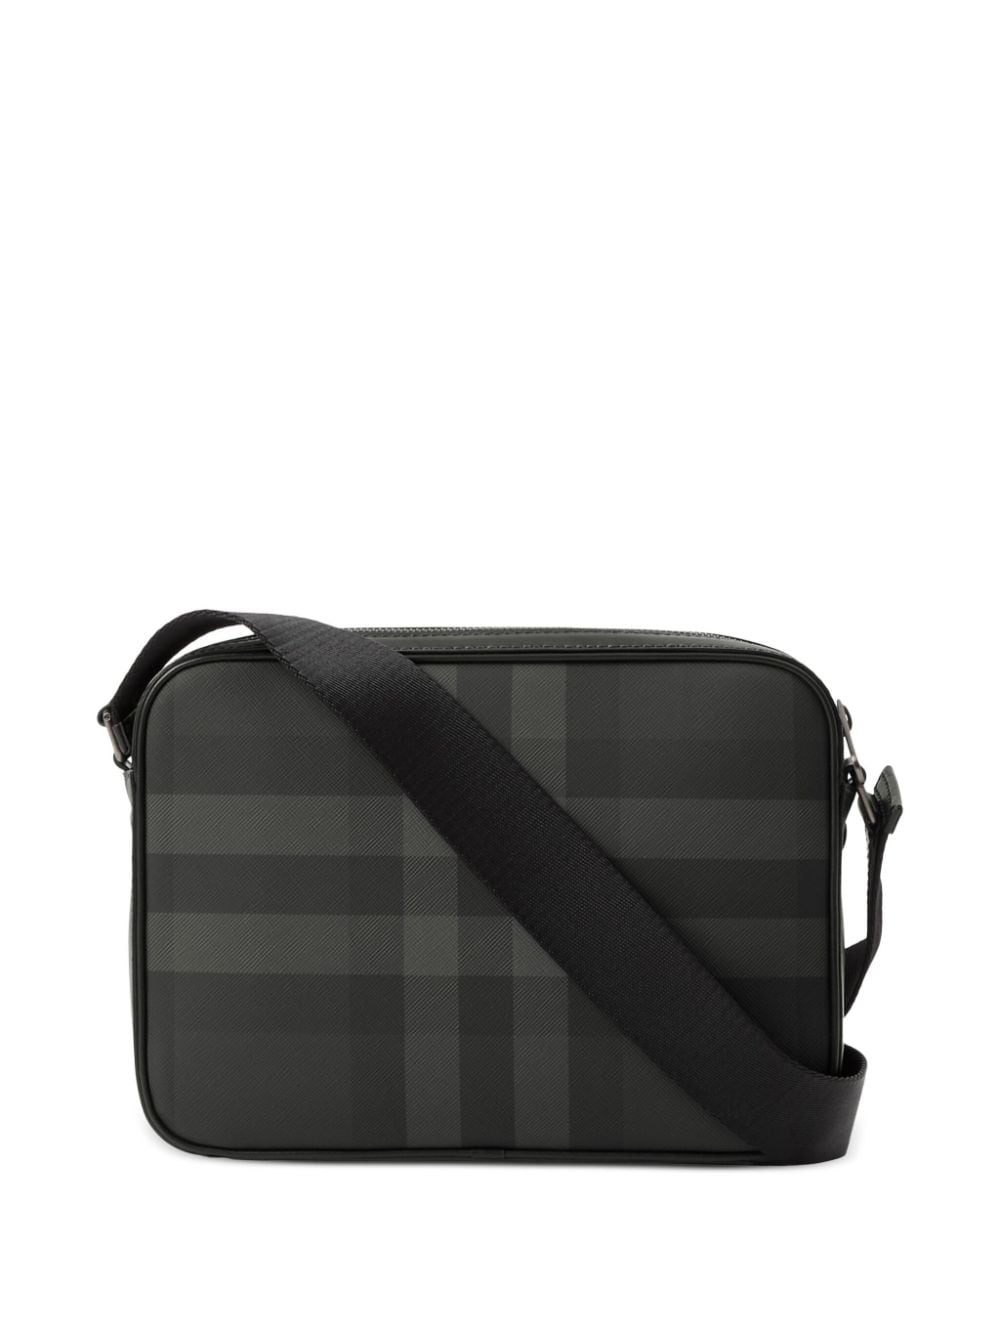 Burberry Check Leather-trimmed Messenger Bag In Charcoal | ModeSens